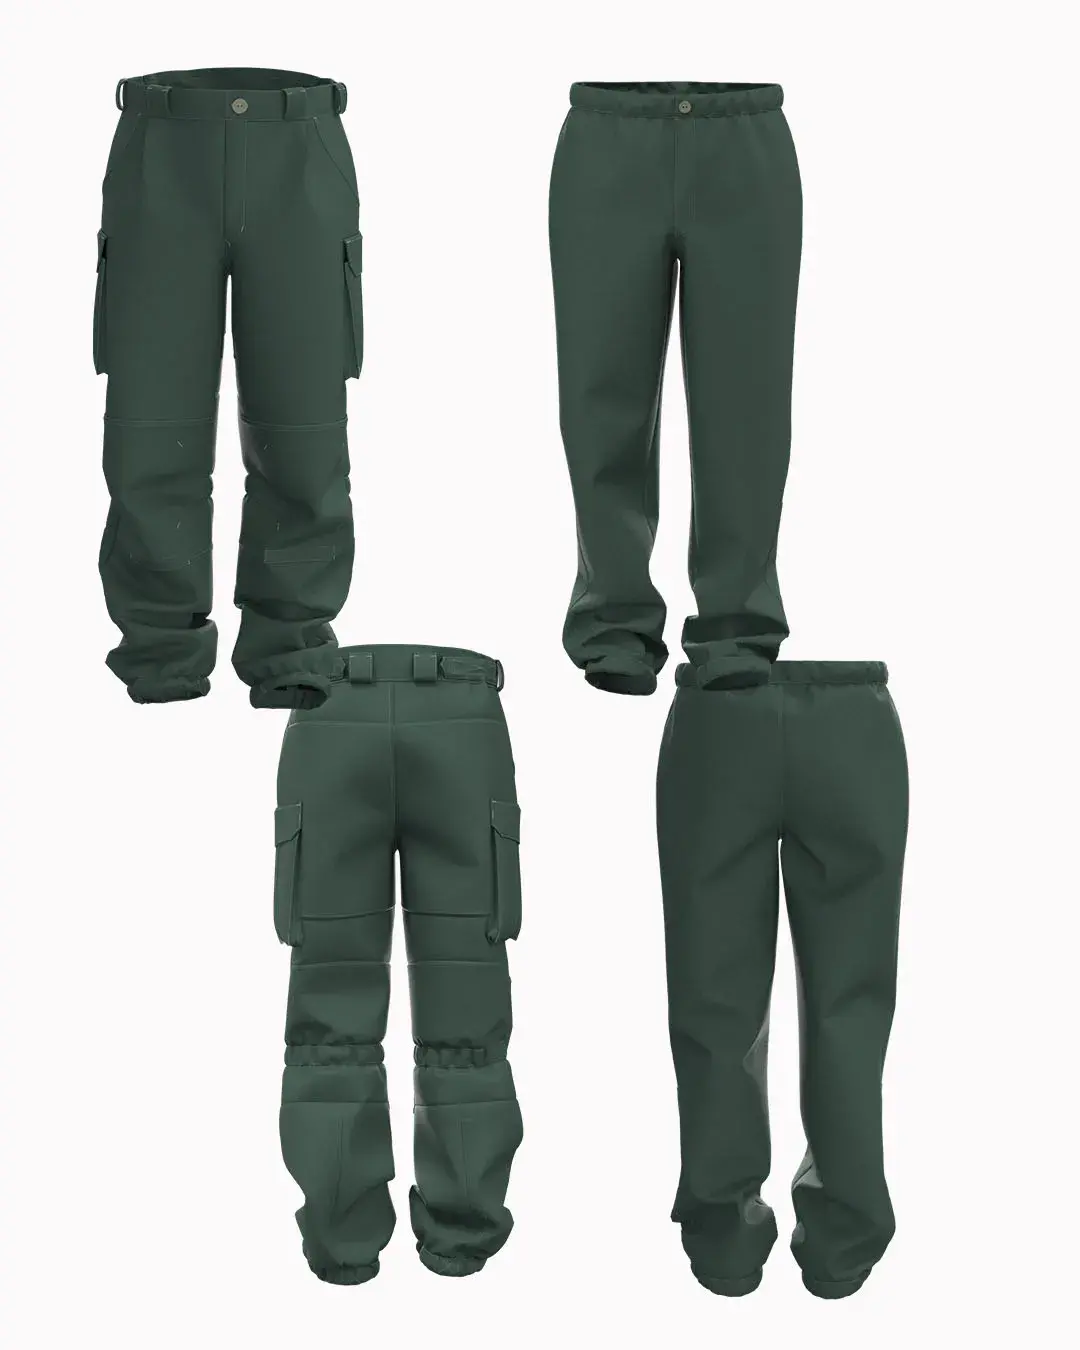 Winter trousers of the AFU